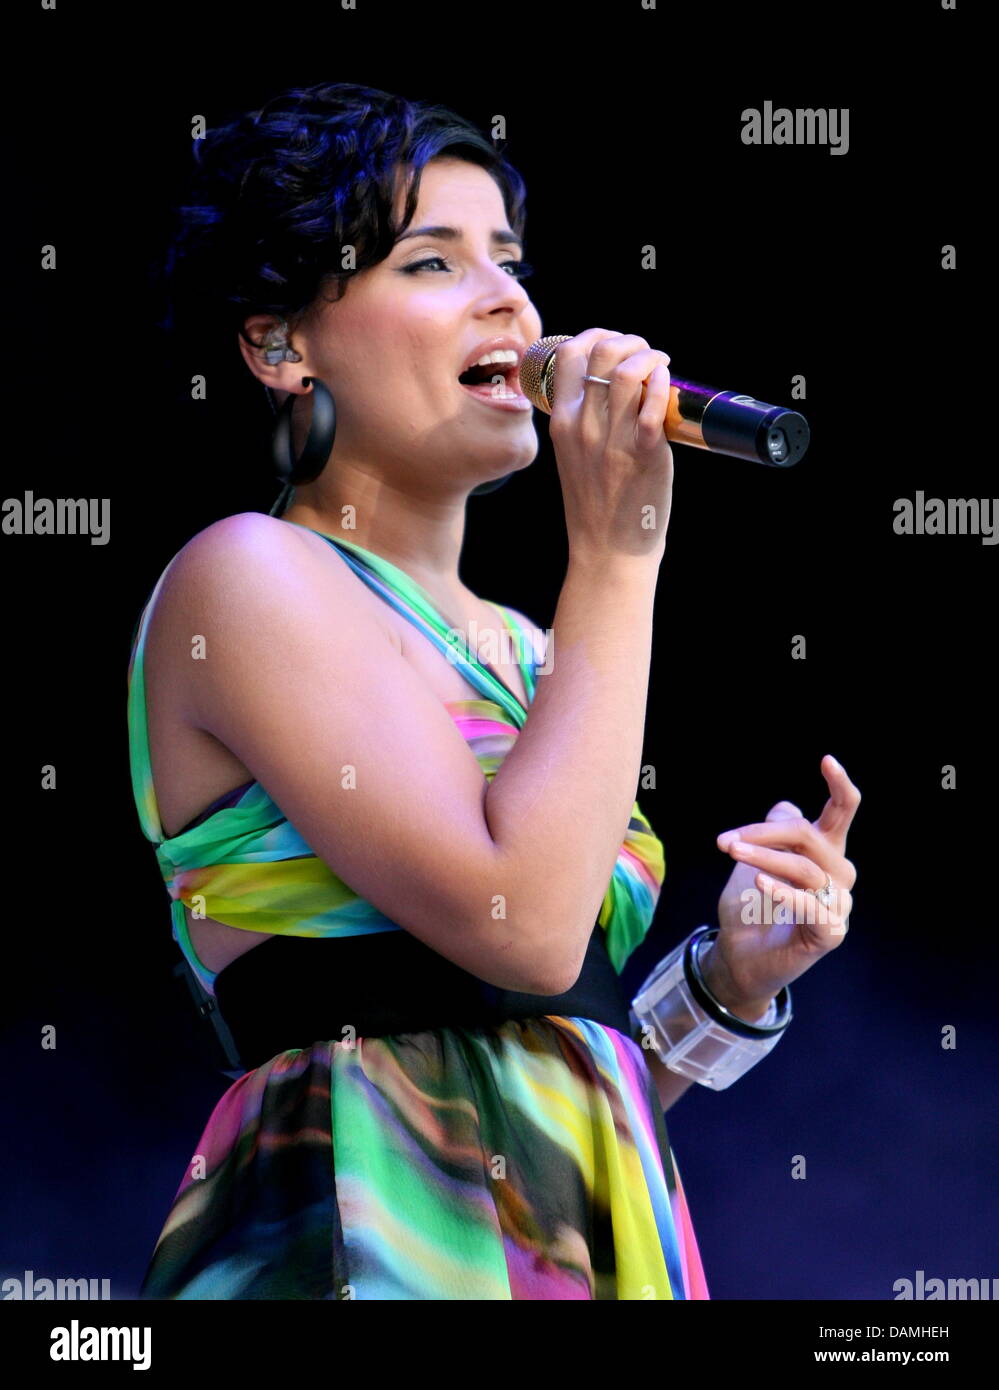 (dpa file) - A file picture dated 8 July 2008 of singer Nelly Furtado at a concert in Munich, Germany. In the case of two young hackers stealing unpublished songs through the internet, the defense plans to hear US artists affected by the attack. Among others,  Lady Gaga, Justin Timberlake and Nelly Furtado are to testify. It is not to understand that the artists' computers were not Stock Photo